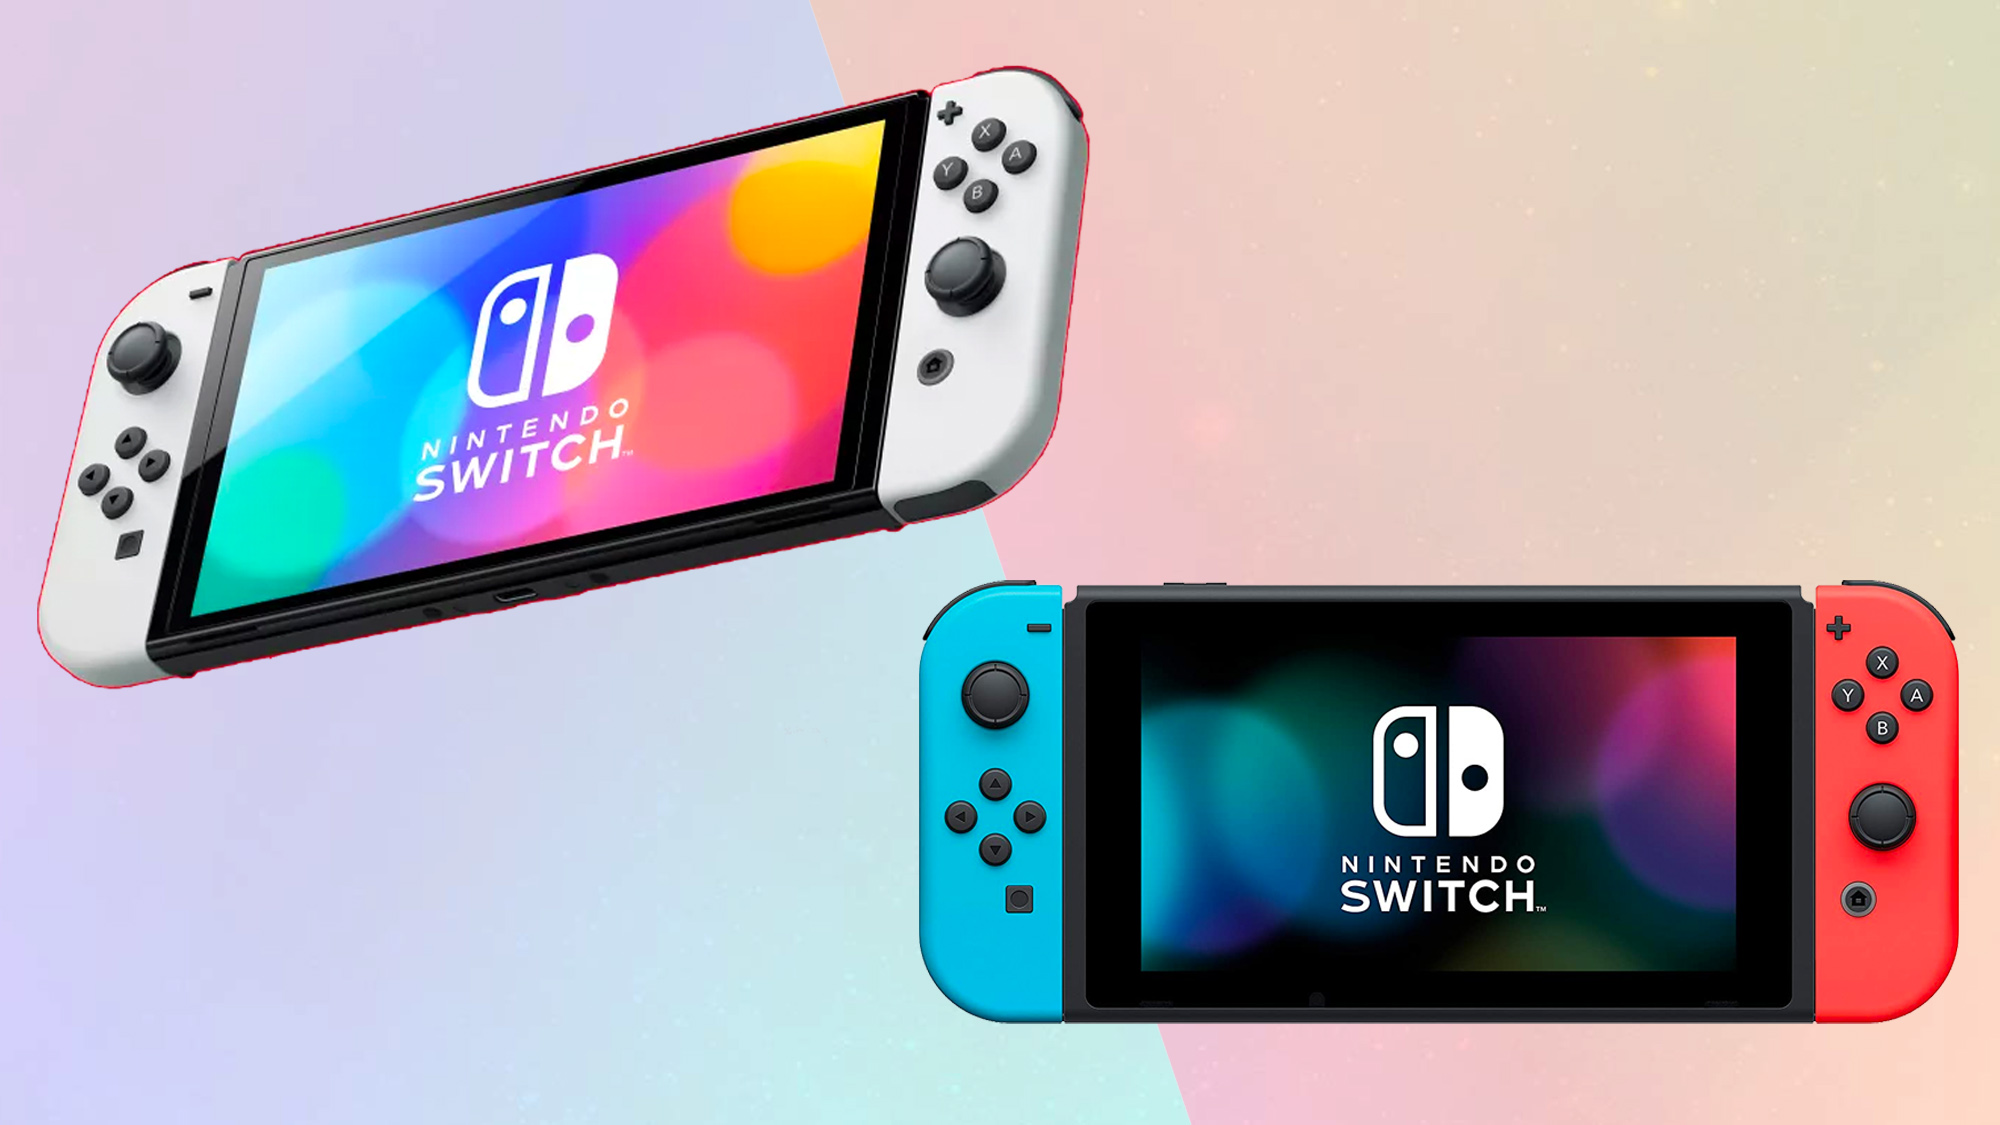 Nintendo Switch OLED — should you wait or buy a Switch now? Tom's Guide